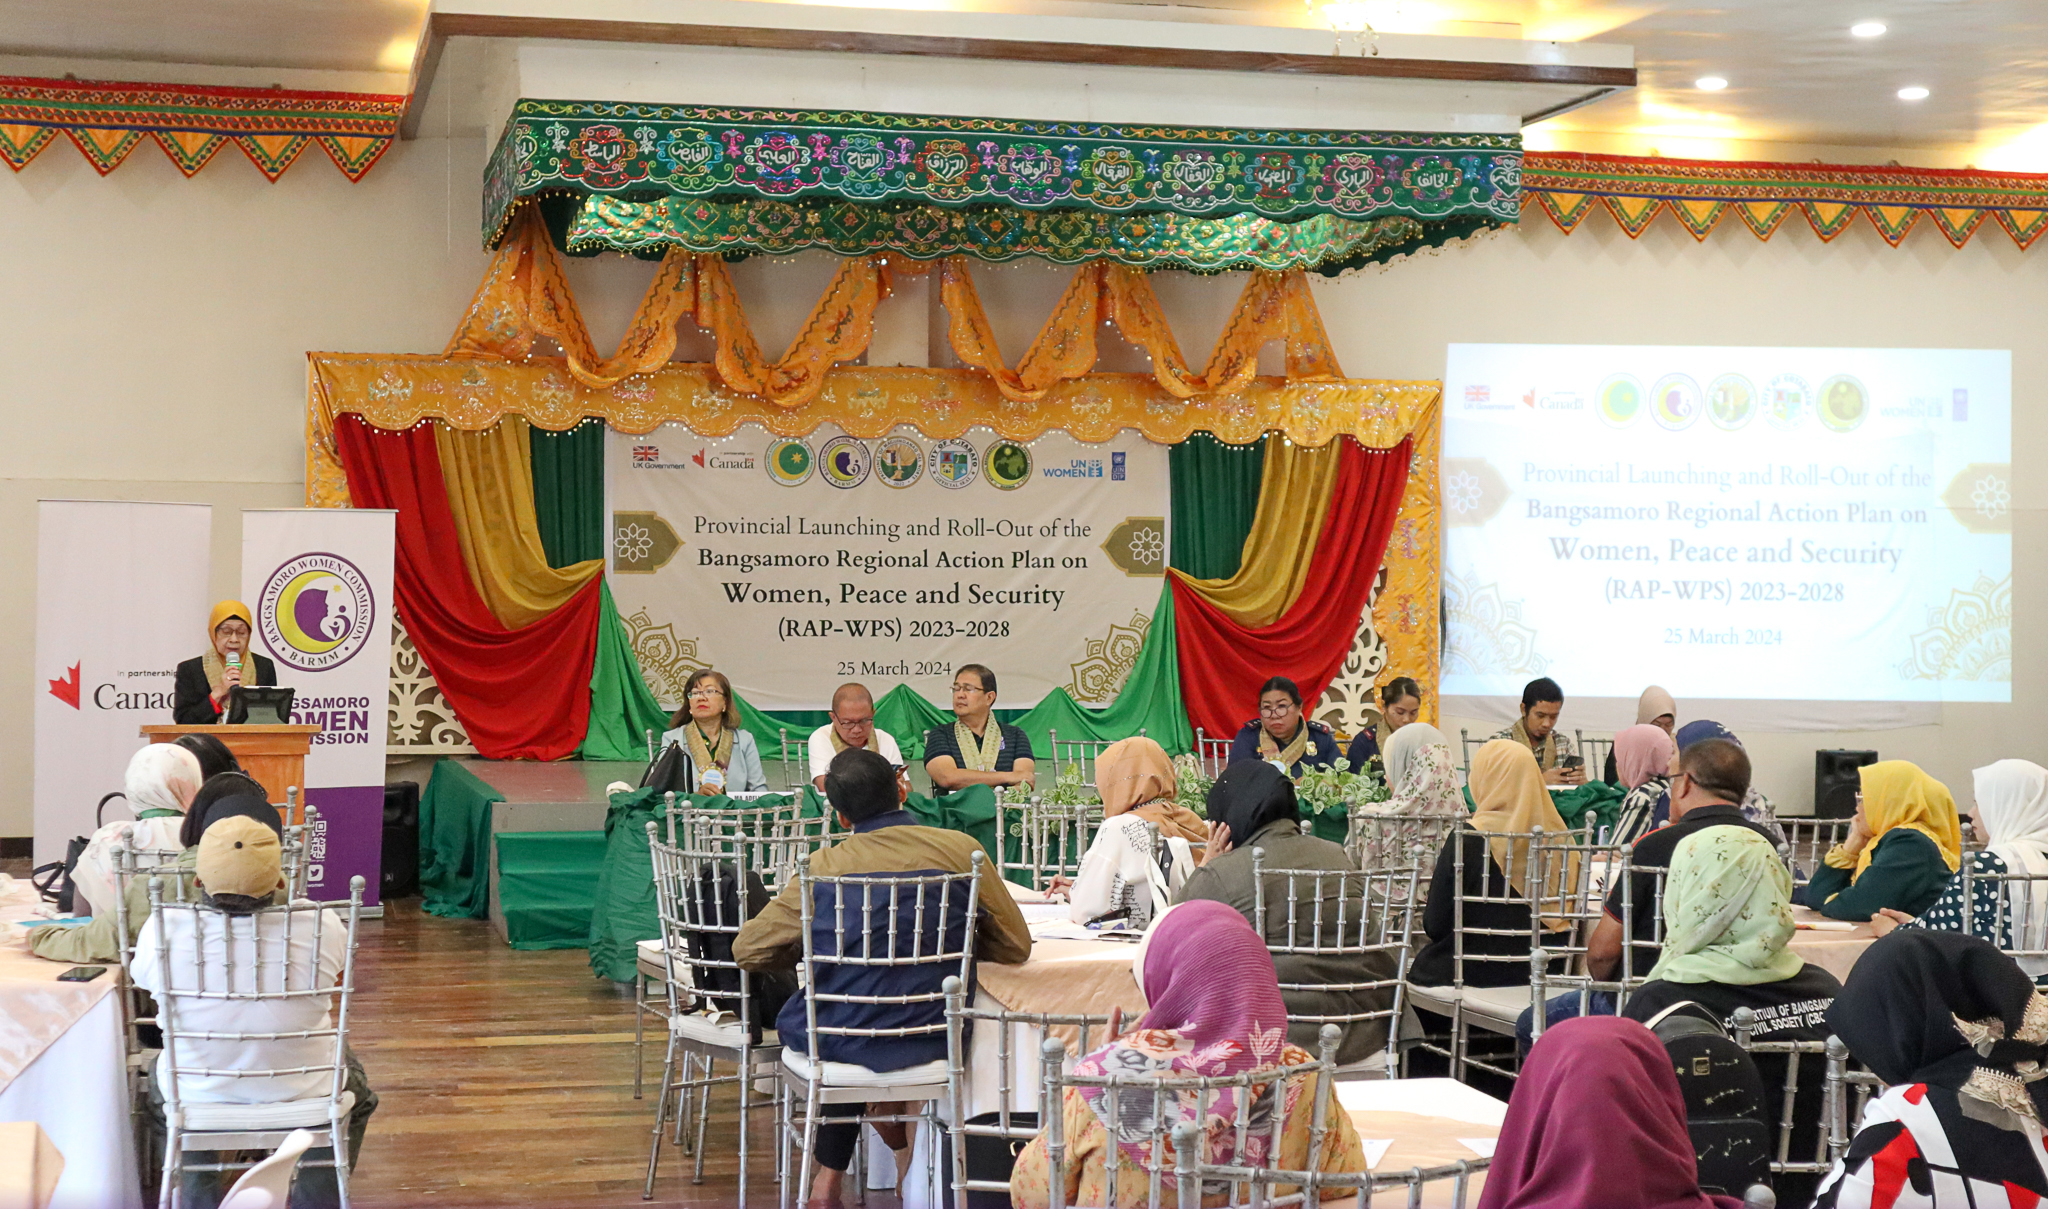 Launching and Roll out of the Bangsamoro Regional Action Plan on Women, Peace and Security 2023-2028 Program in the Province of Maguindanao Del Norte